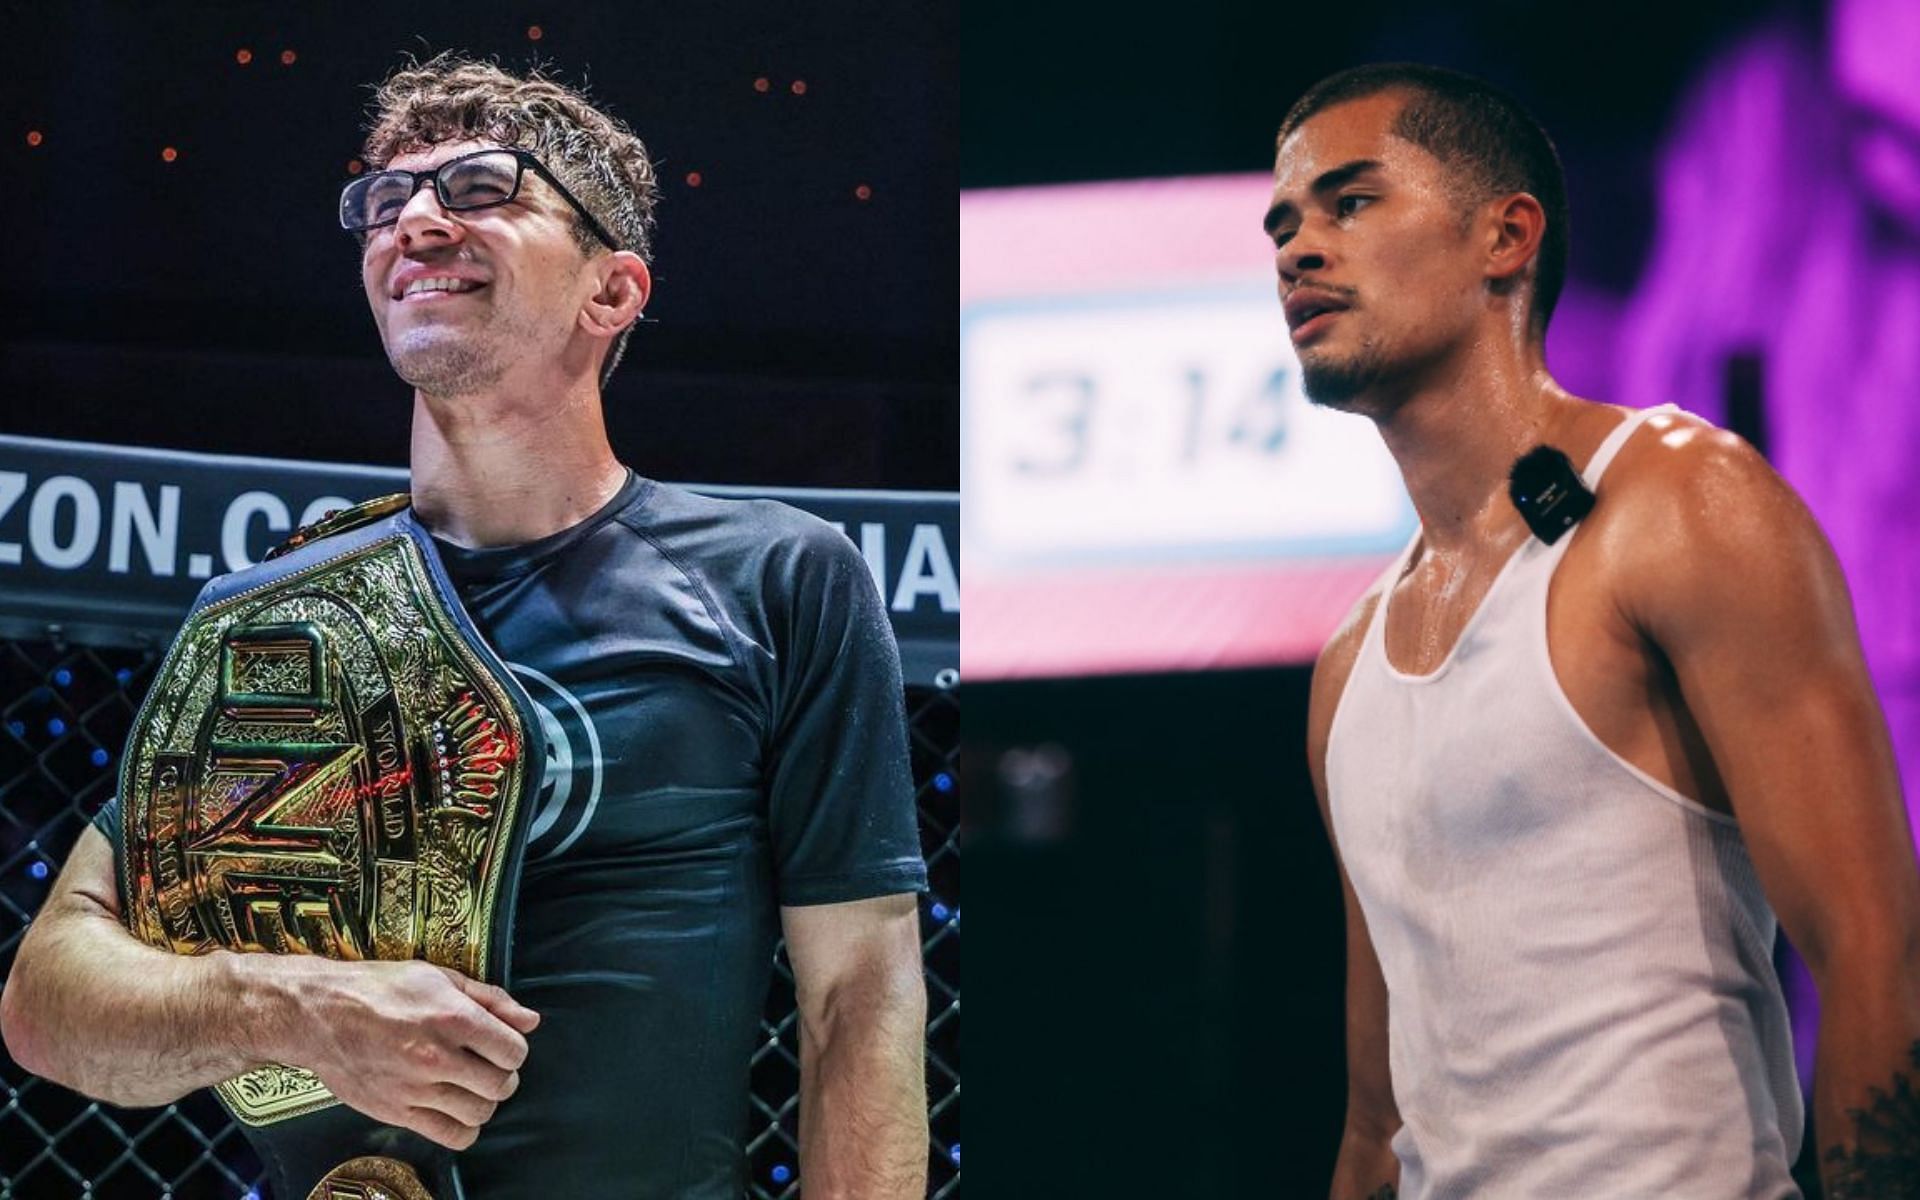 BJJ superstar Mikey Musumeci (left) and social media influencer Sneako (right) [Images courtesy: @mikeymusumeci on Instagram and @sneako on X]